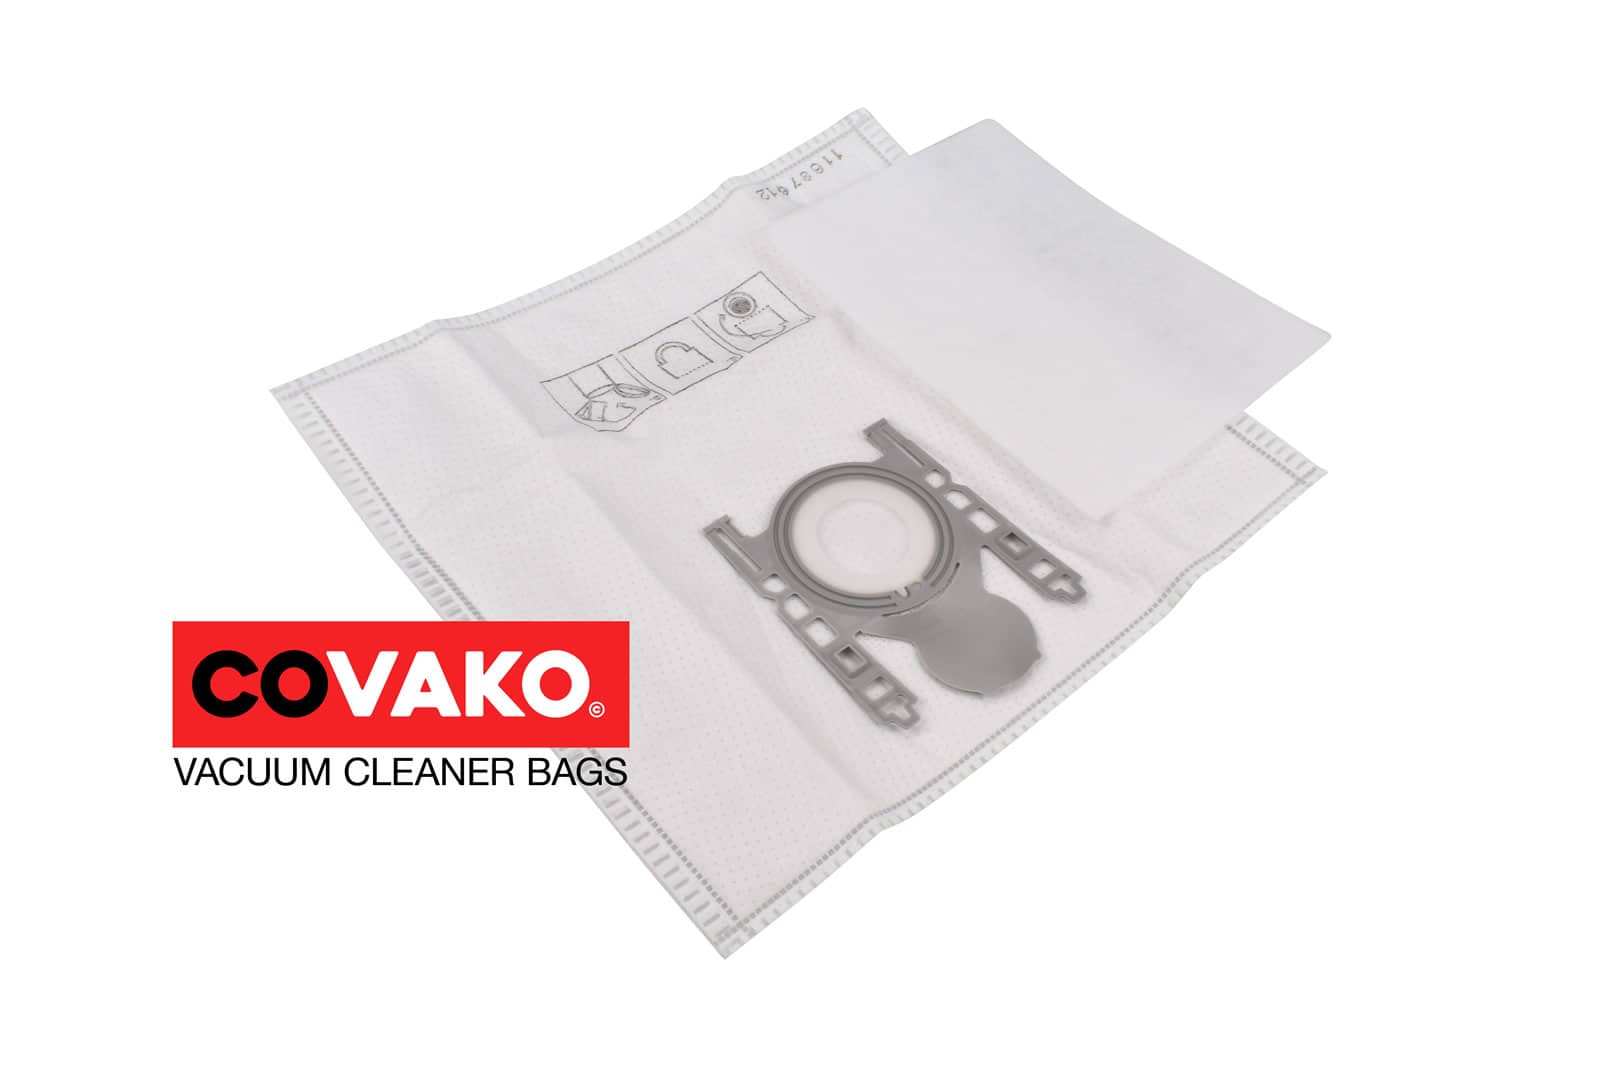 Bosch BSGL 2Move / Synthesis - Bosch vacuum cleaner bags